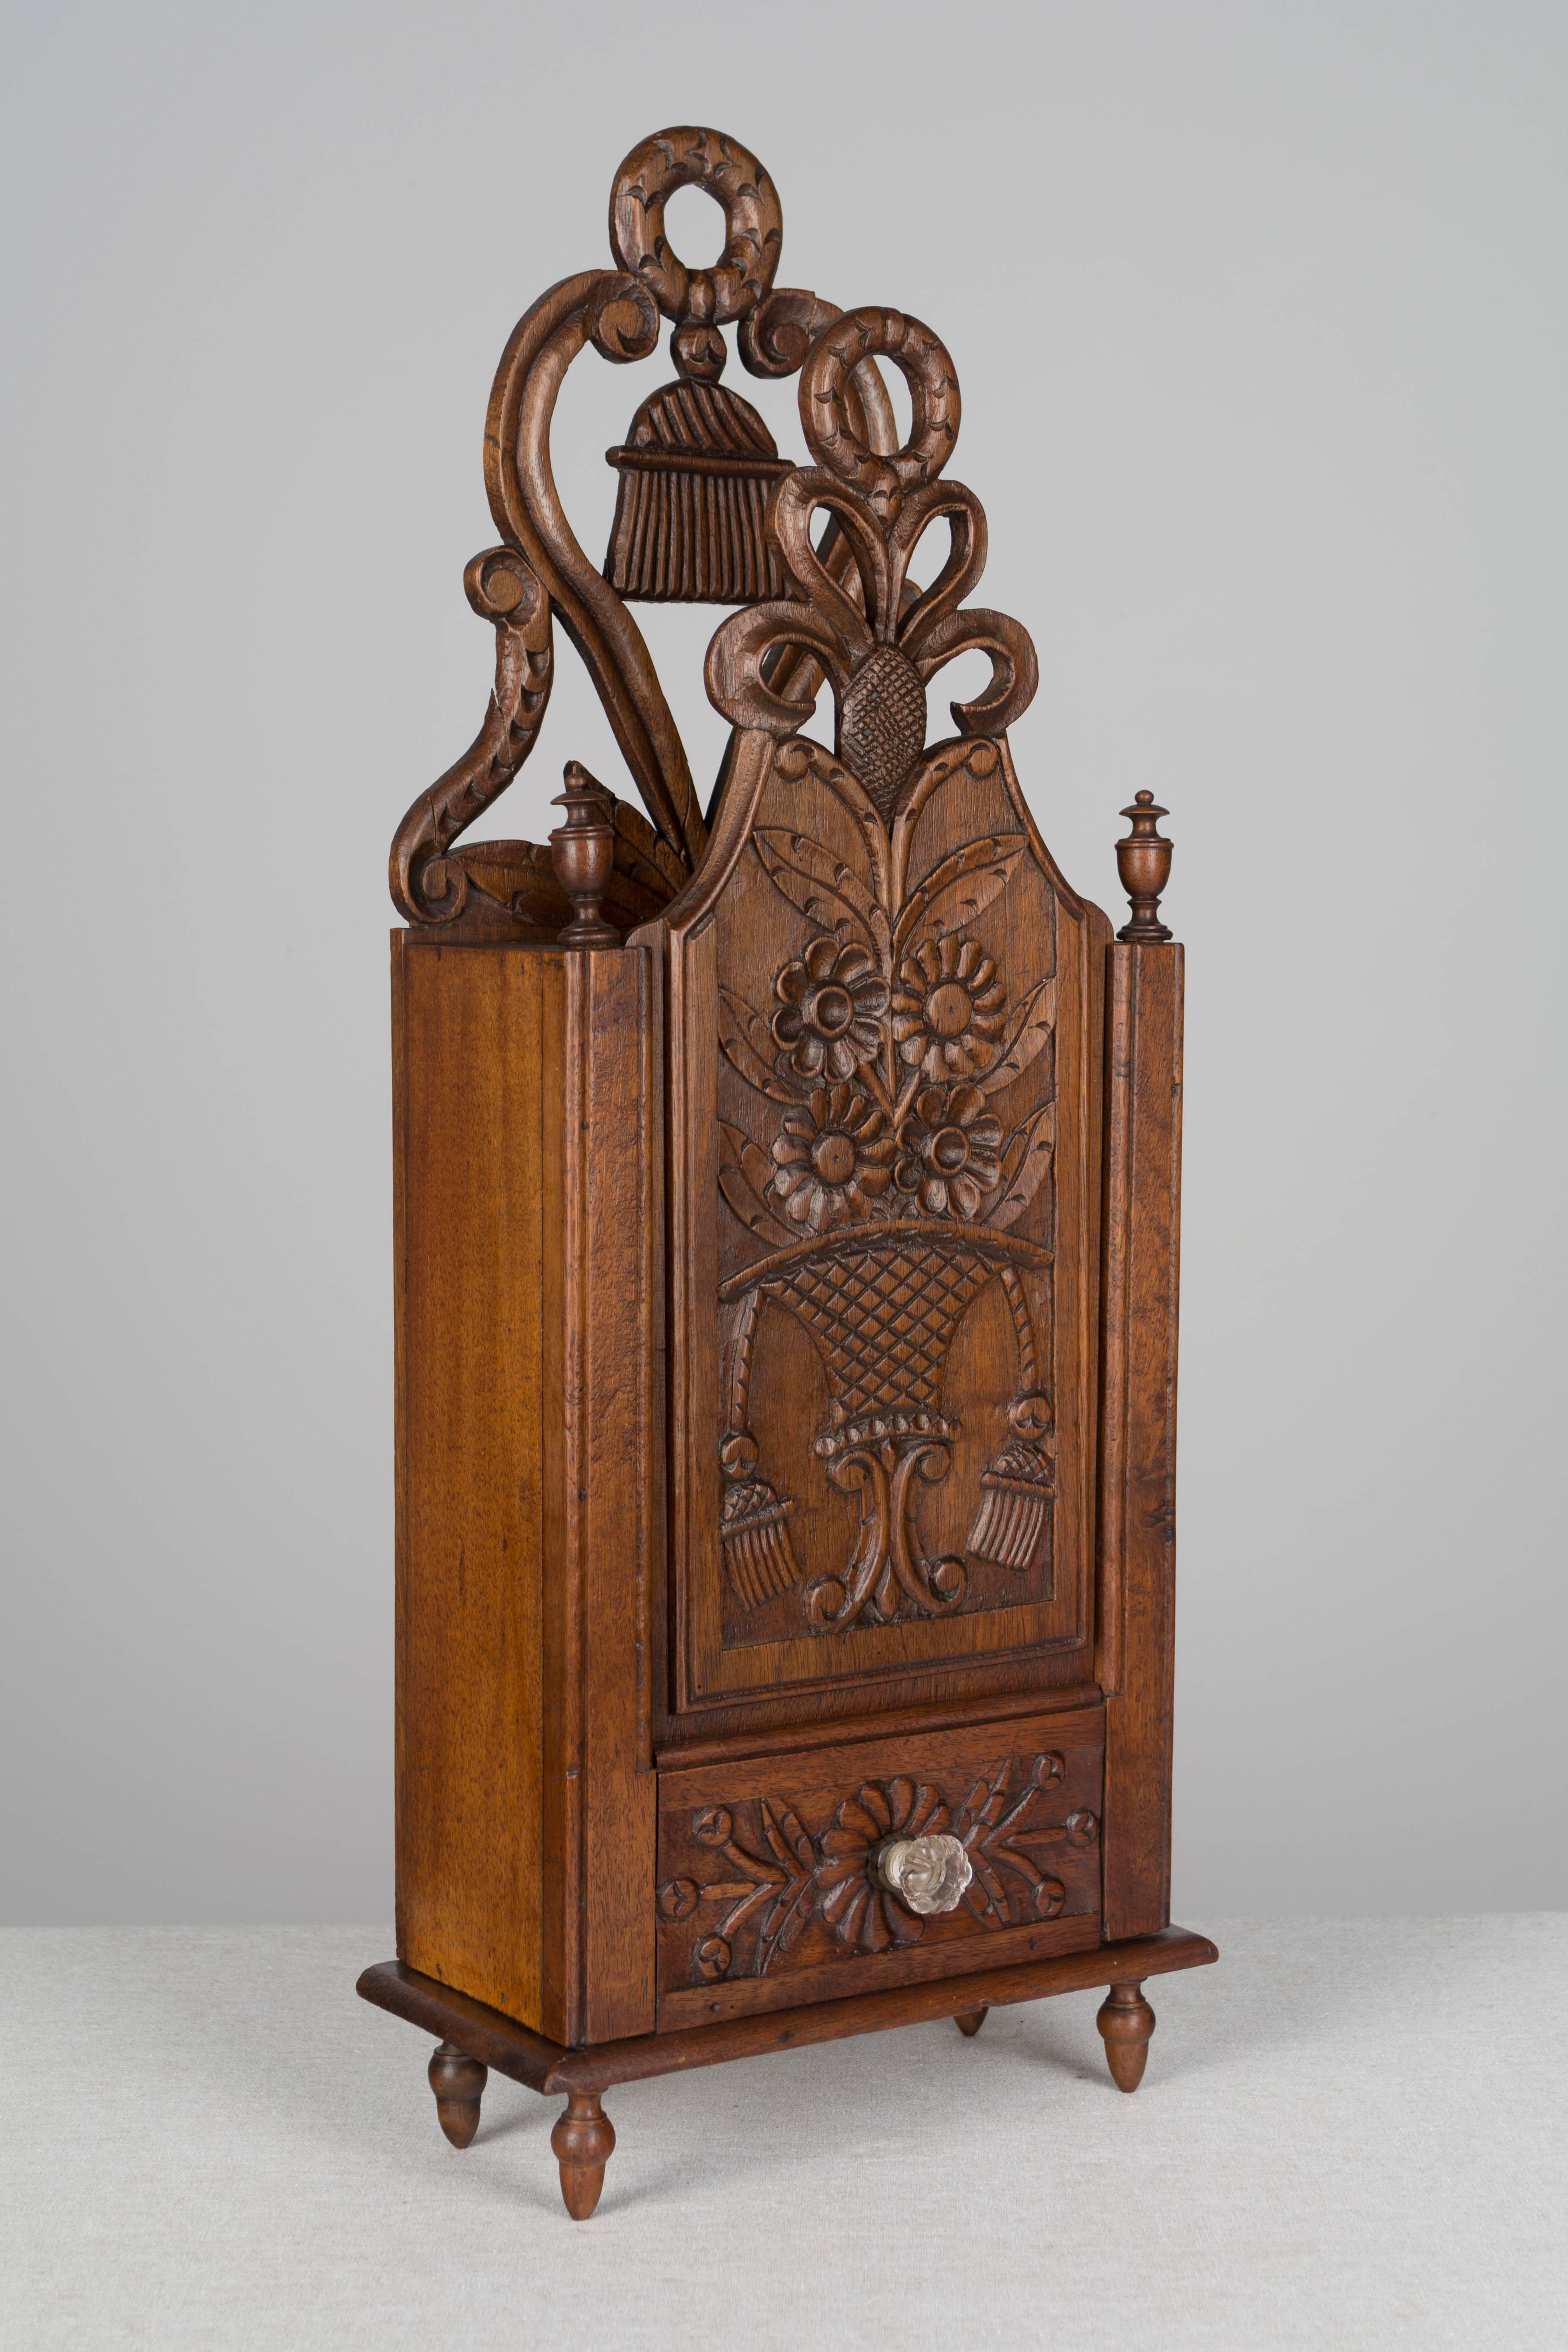 A beautiful French fariniere from Provence, made of walnut with fine hand-carved details and an elaborate pierced crest. Nicely detailed with tiny turned finials and feet and a false drawer with glass knob. A fariniere is a sliding paneled box that